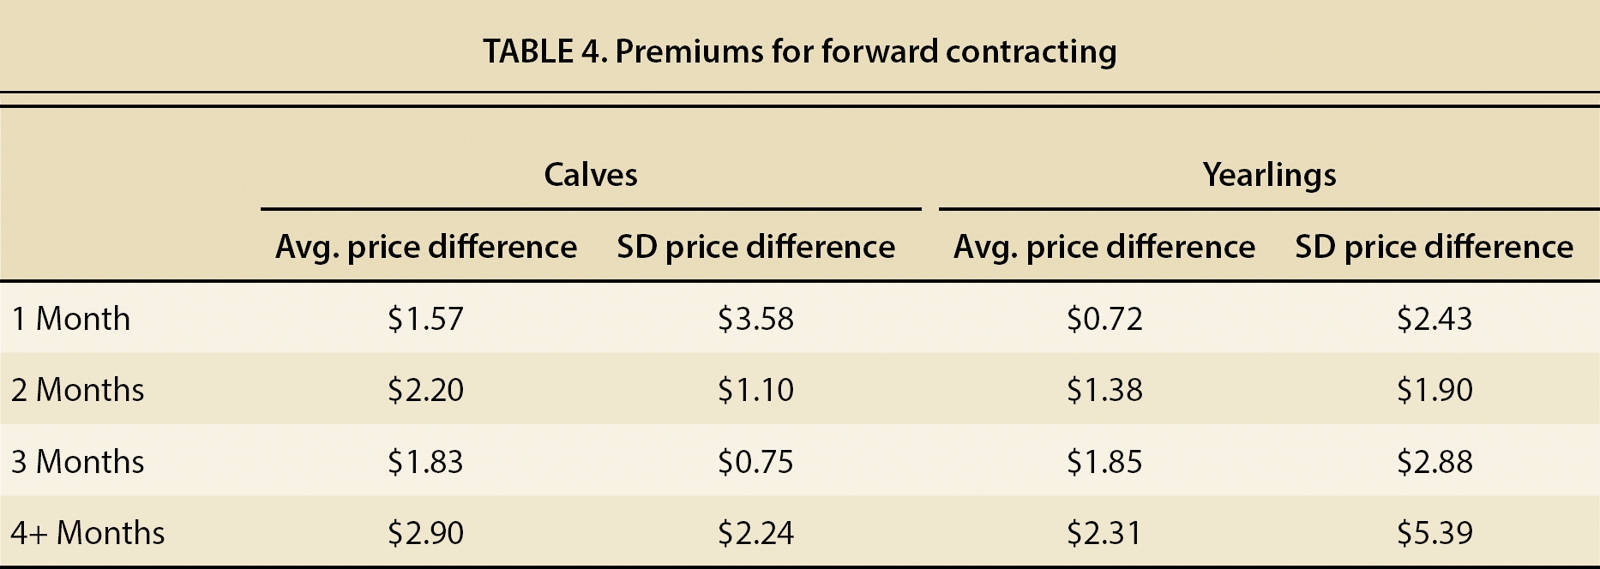 Premiums for forward contracting